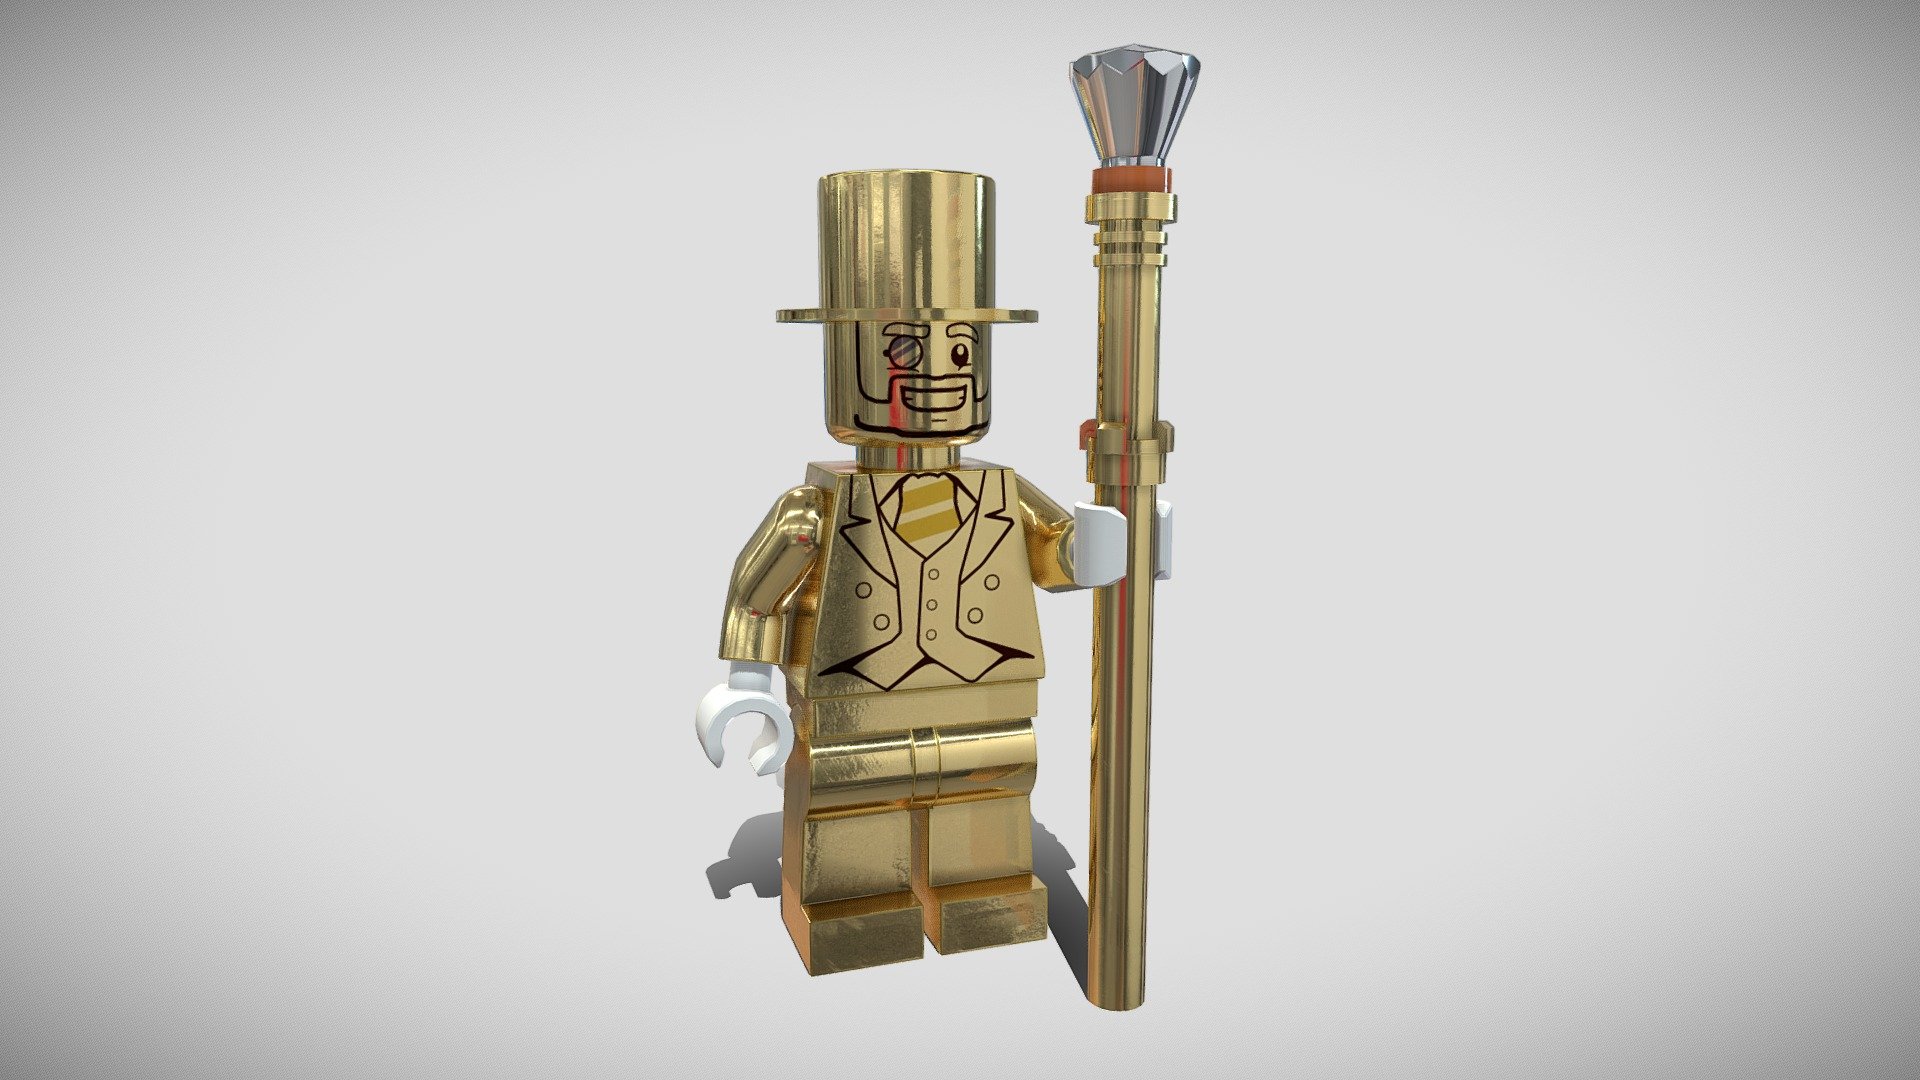 3D Model of the LEGO Minifigures character, Mr. Gold modelled in Maya and textured in Substance Painter 3d model